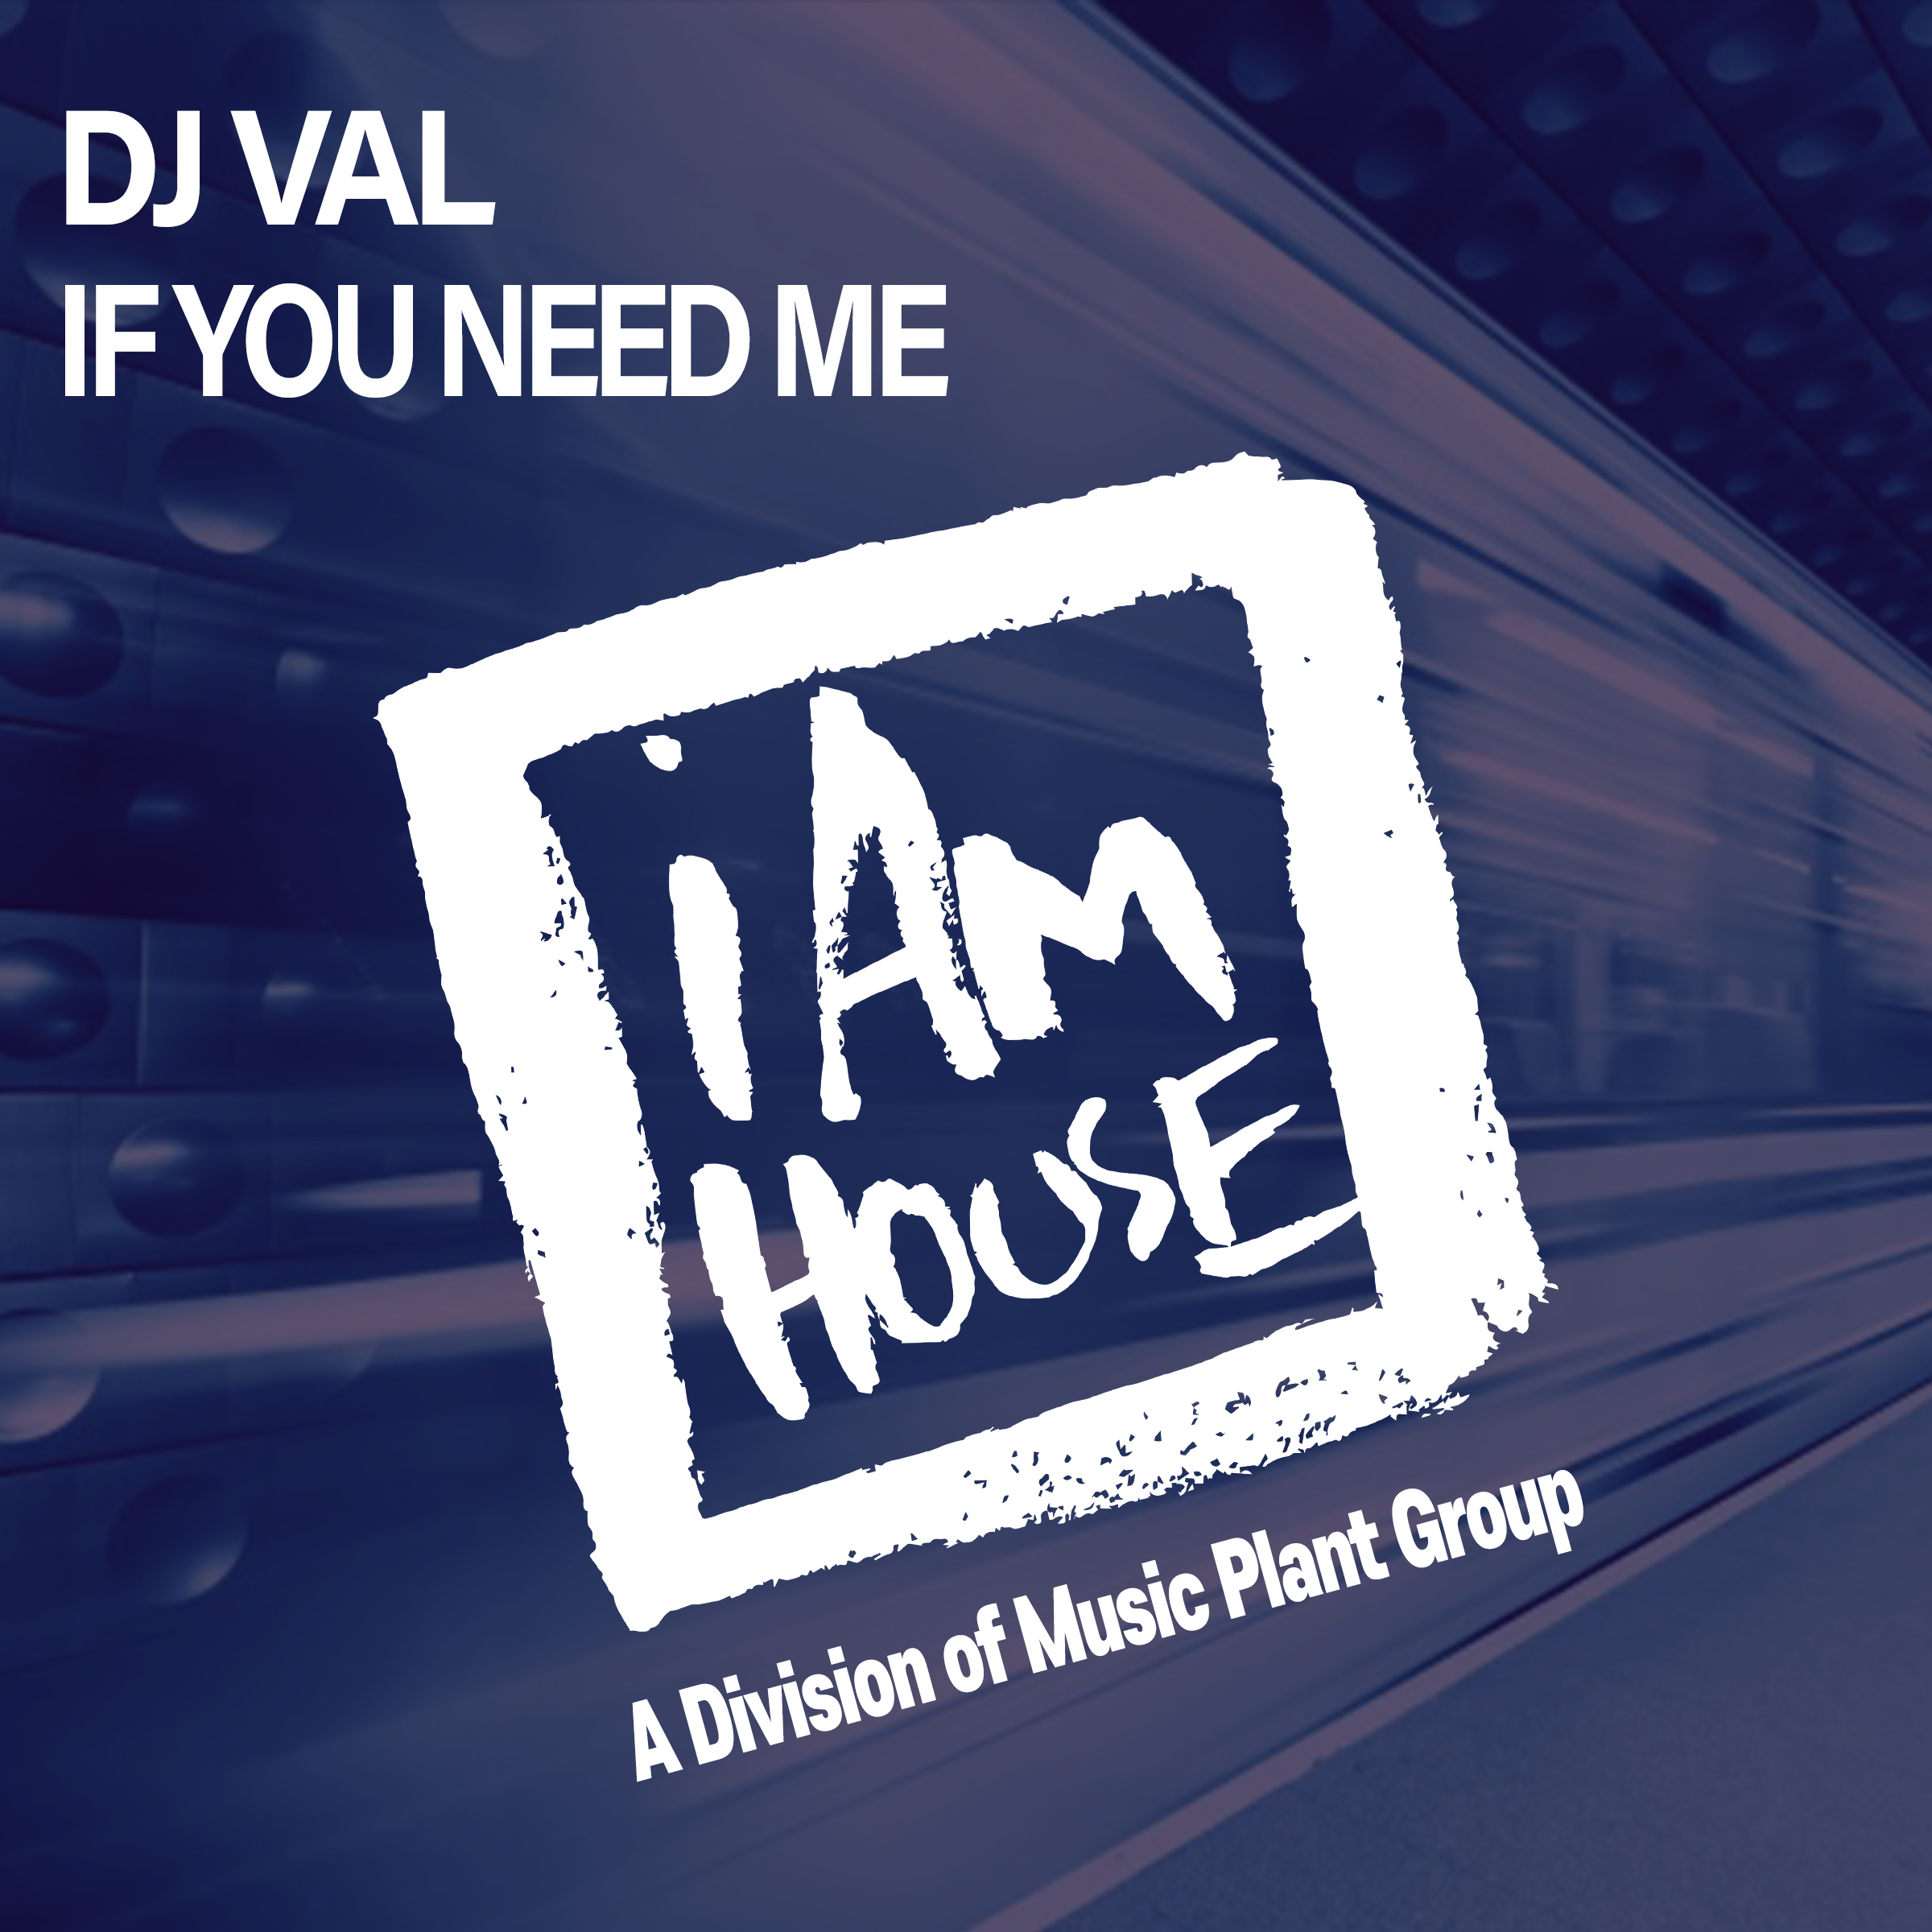 DJ Val альбомы. Taking to the Top DJ Val. I need you. Val песни.